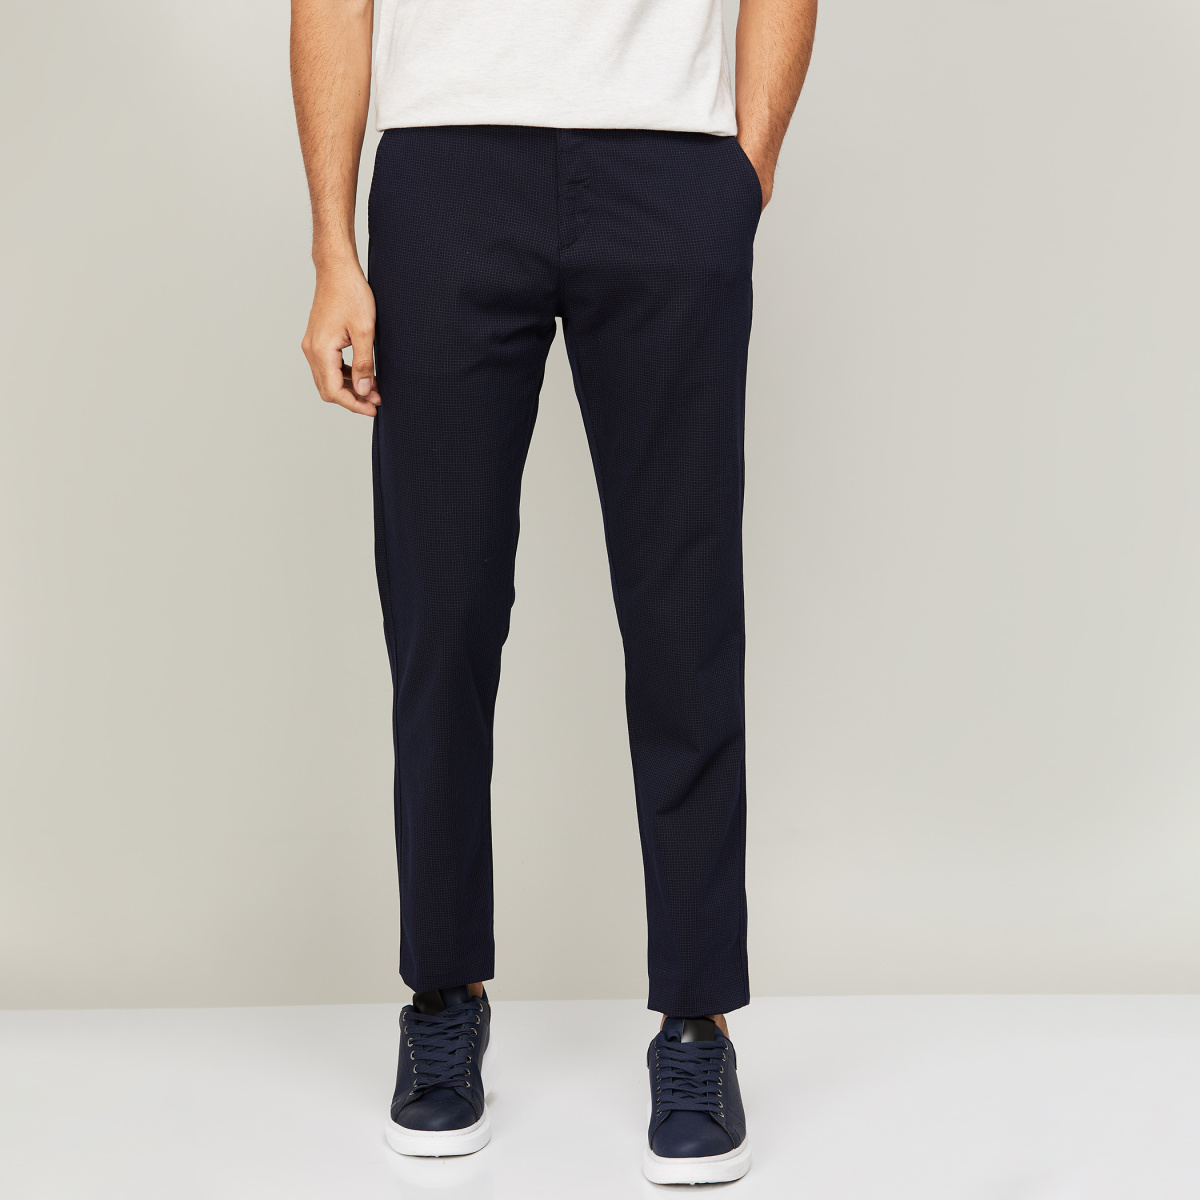 U.S. POLO ASSN. Men Checked Ankle-Length Casual Trousers